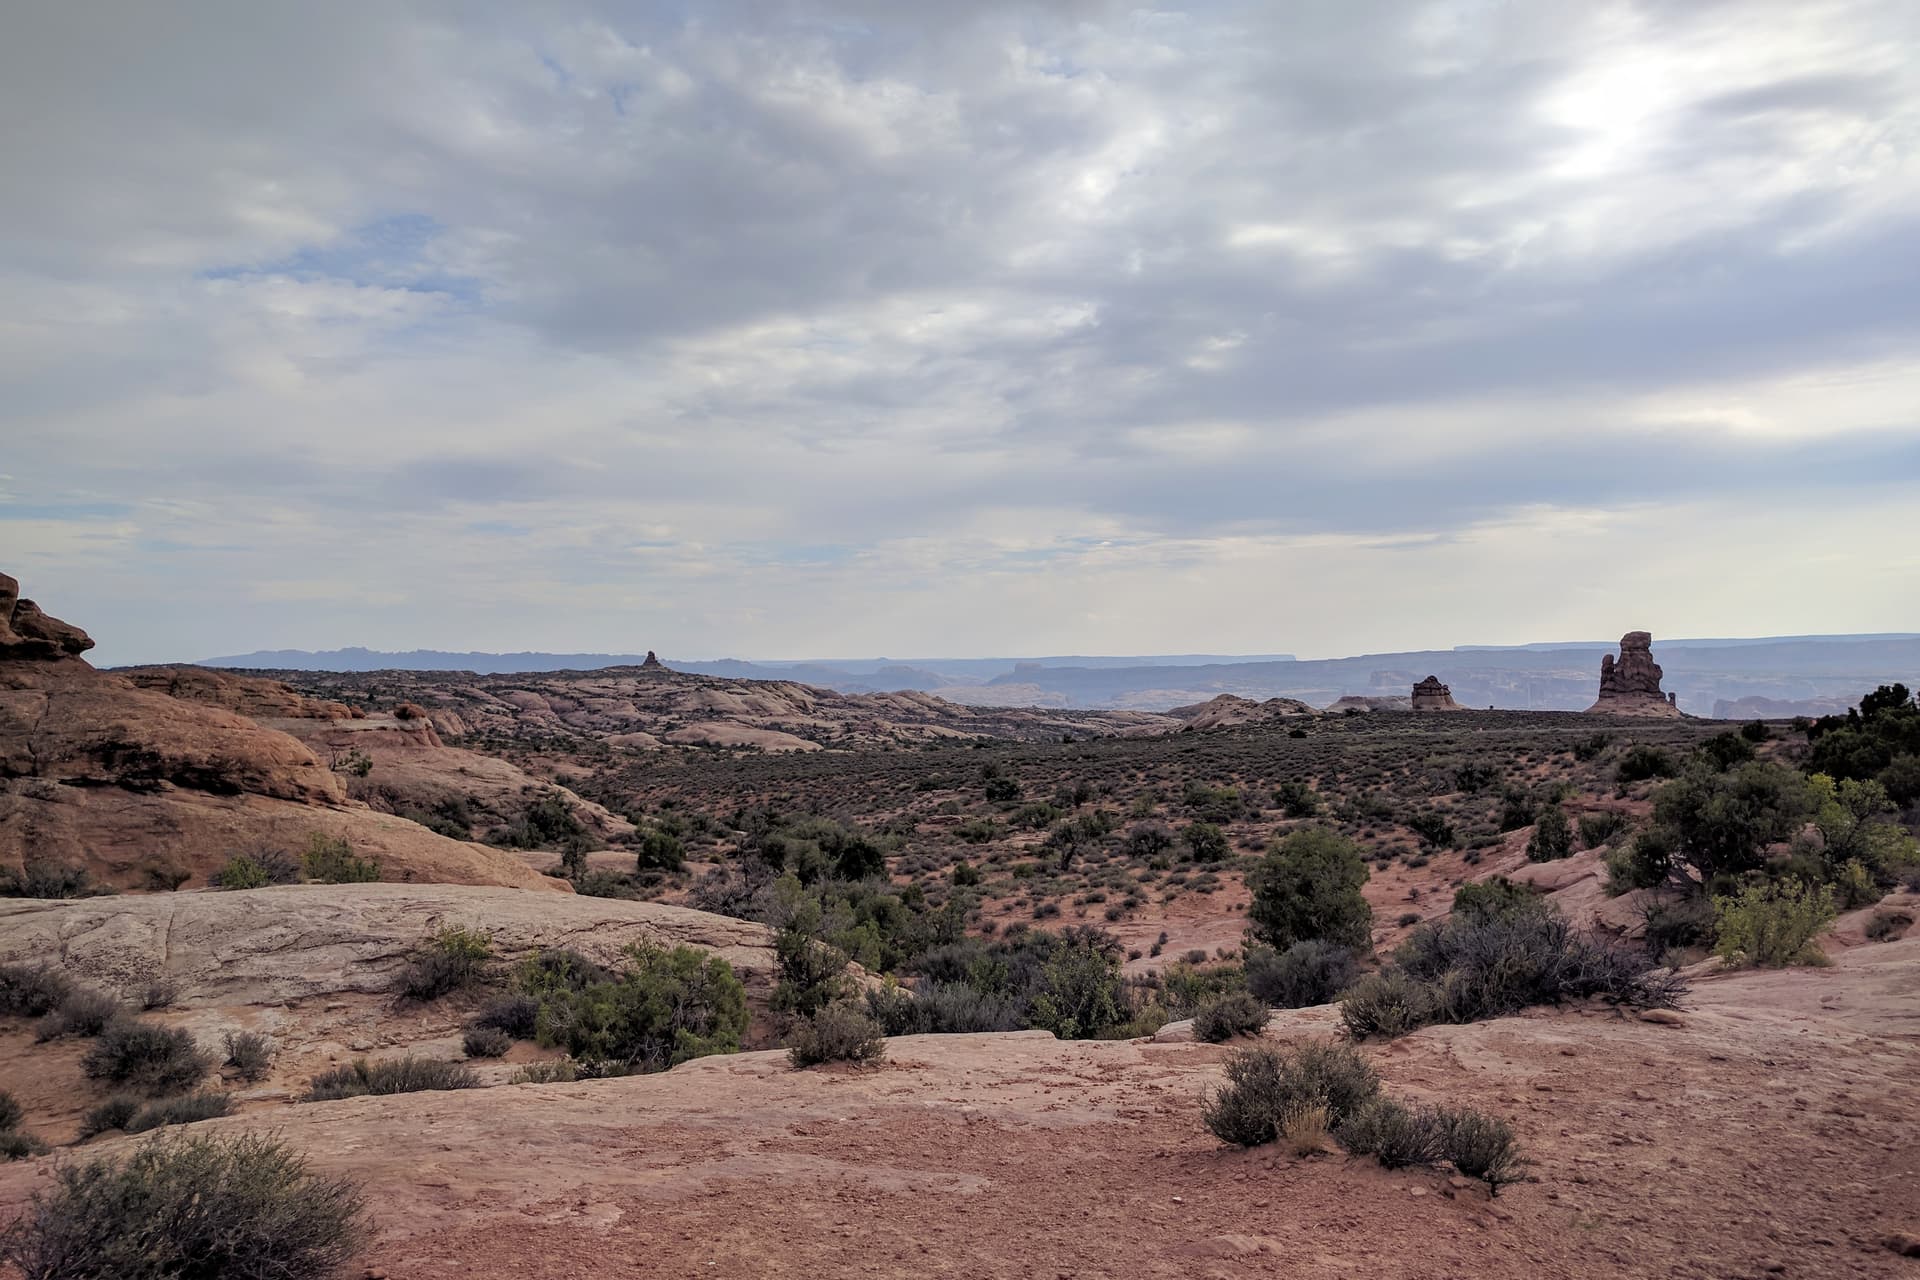 Looking east across Arches National Park. Red and white sandstone undulates across the top of the plateau, with a few stone pillars visible in the distance. On the horizon, the mesas and canyone of Canyonlands National Park.